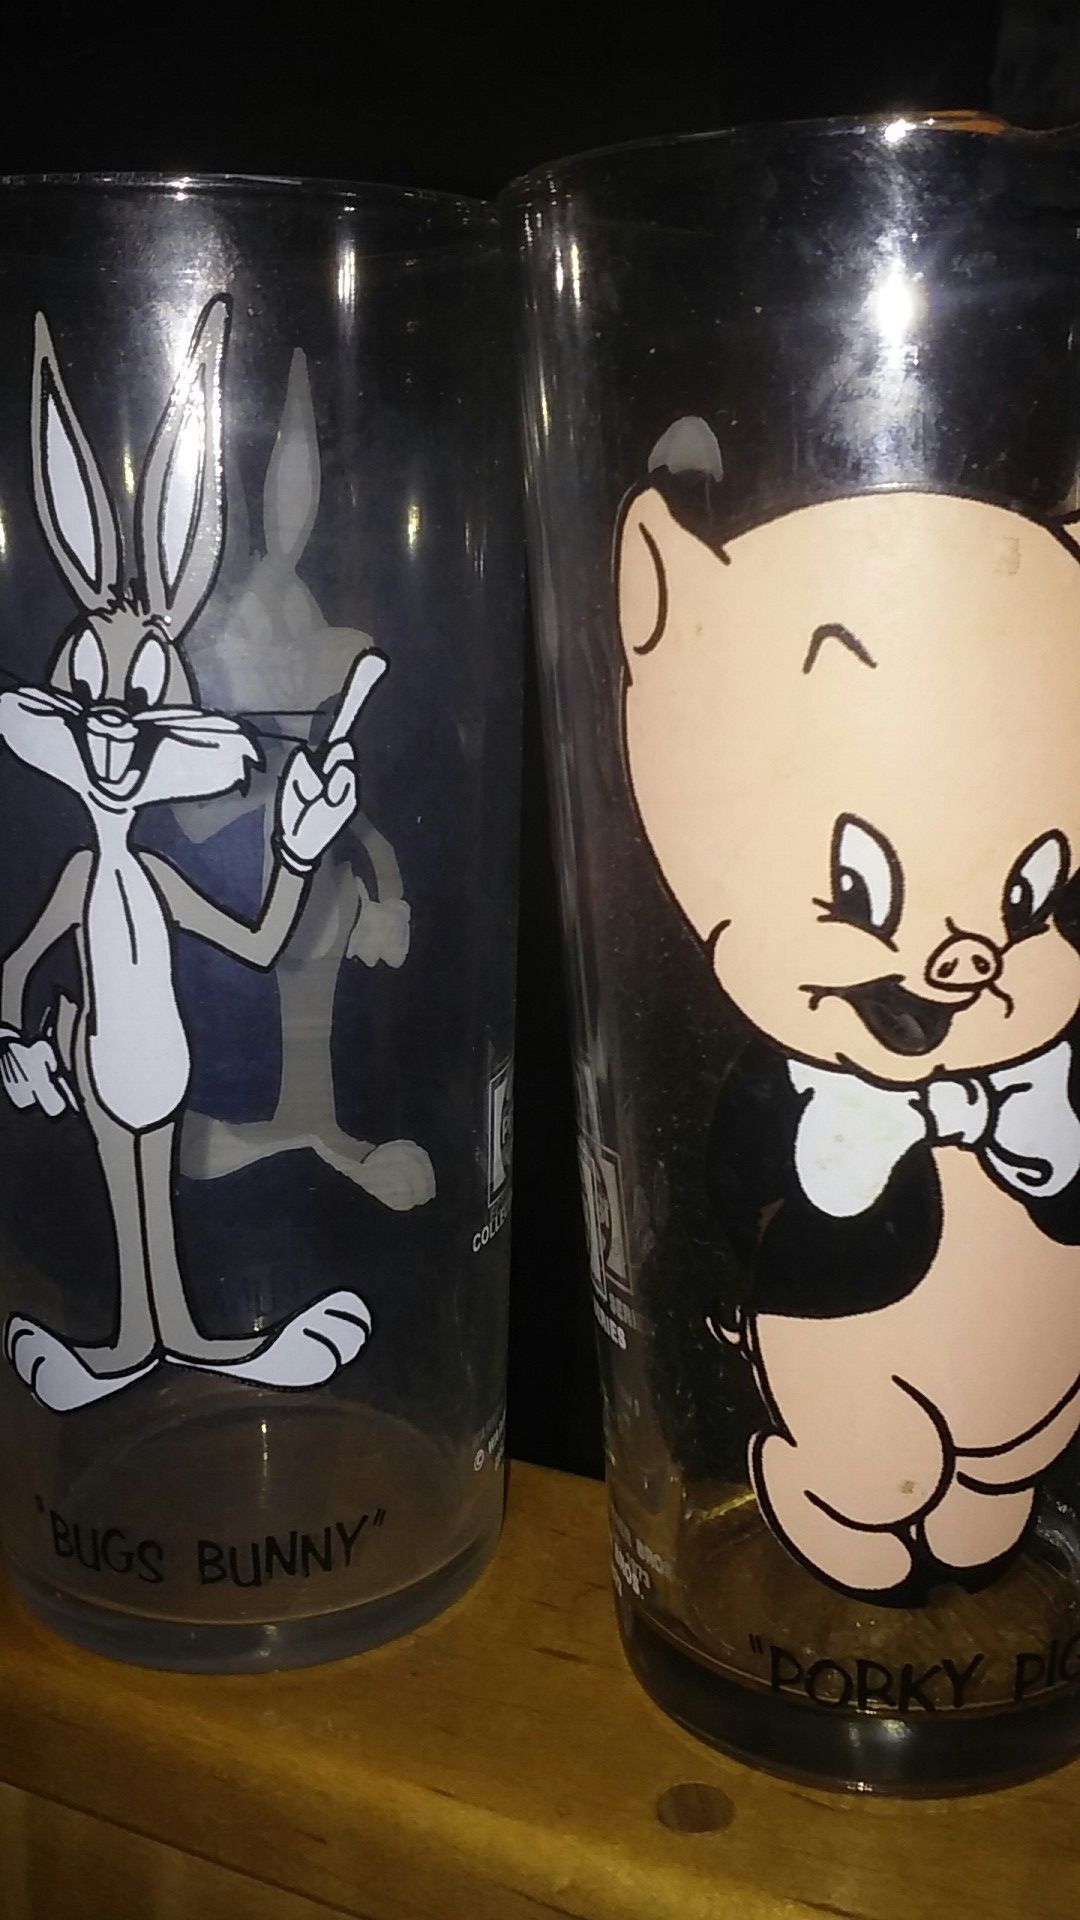 Bugs Bunny/Porky Pig 1973 Collectible Glasses by Pepsi